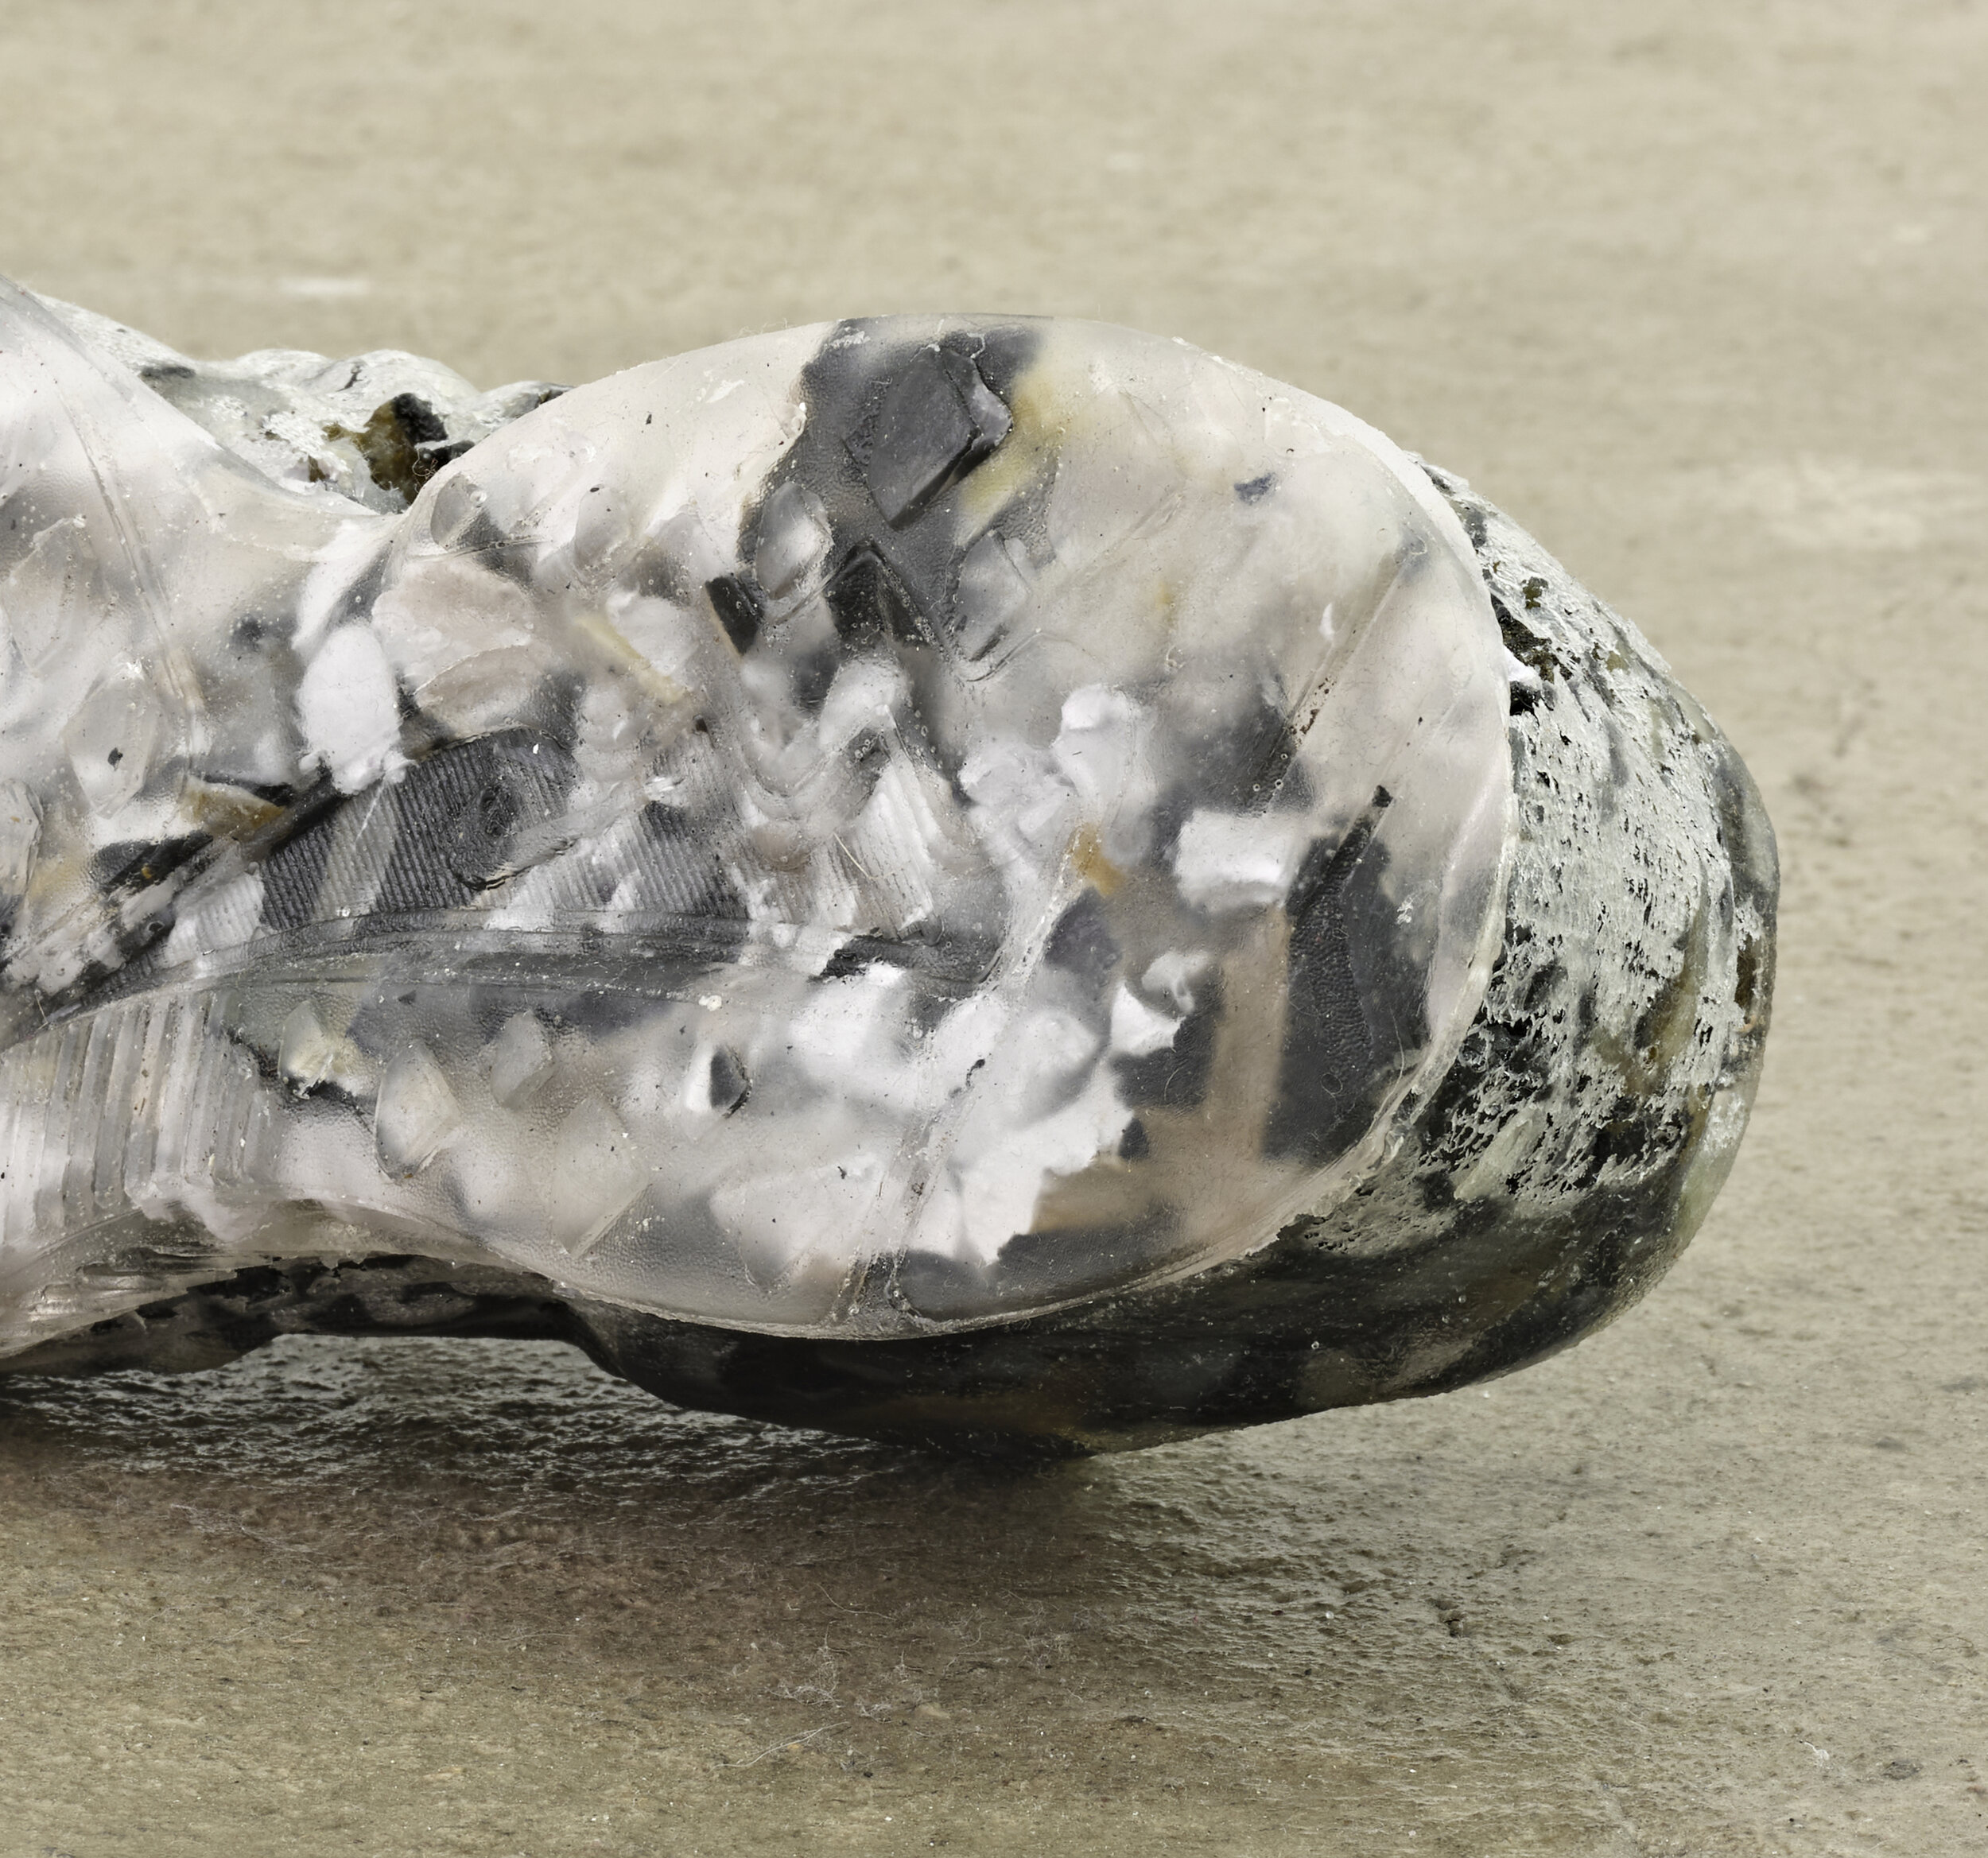  Jeenho Seo  “New” shoes , 2021 (detail; right) artist’s worn sneakers, epoxy resin  6 x 12 x 5 inches (15 x 31 x 13 cm) 